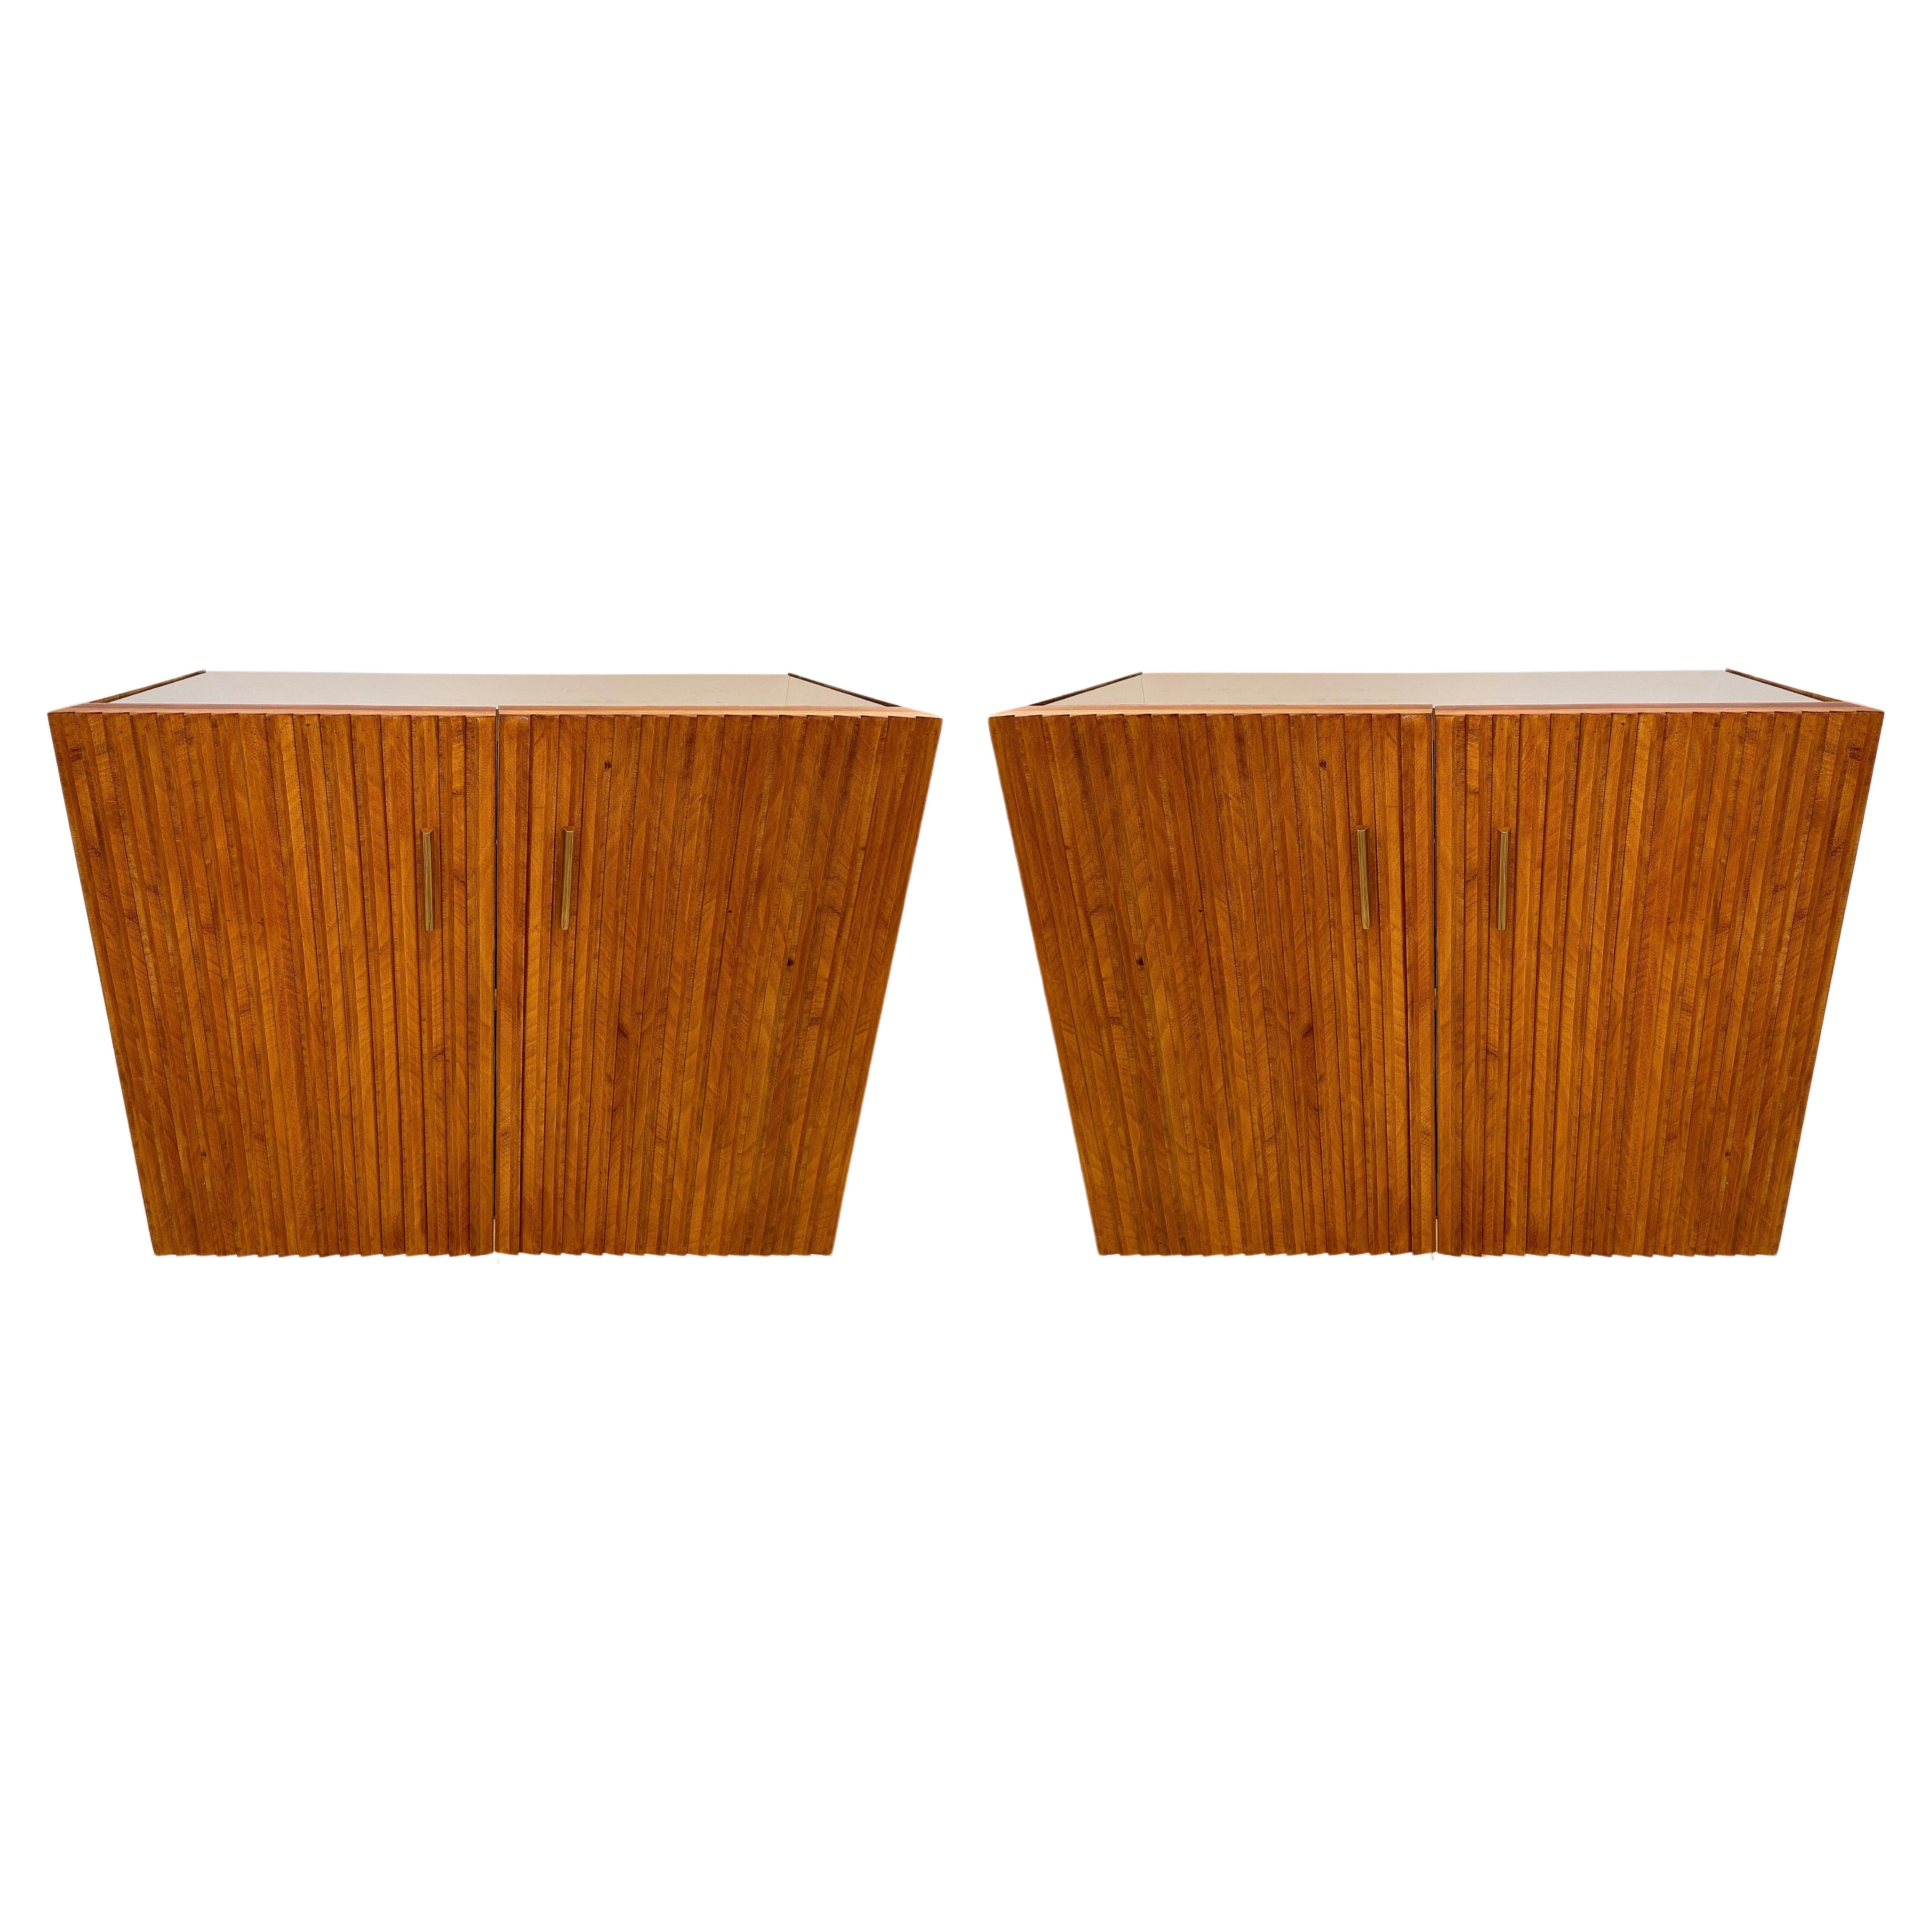 Pair of wood Plissé wave, brass and mirror buffets cabinets cupboards dressers credenzas sideboard or large bedside tables nightstands. Artisanal handmade contemporary work by an italian workshop. In the mood of Mid-Century Modern like Gio Ponti,